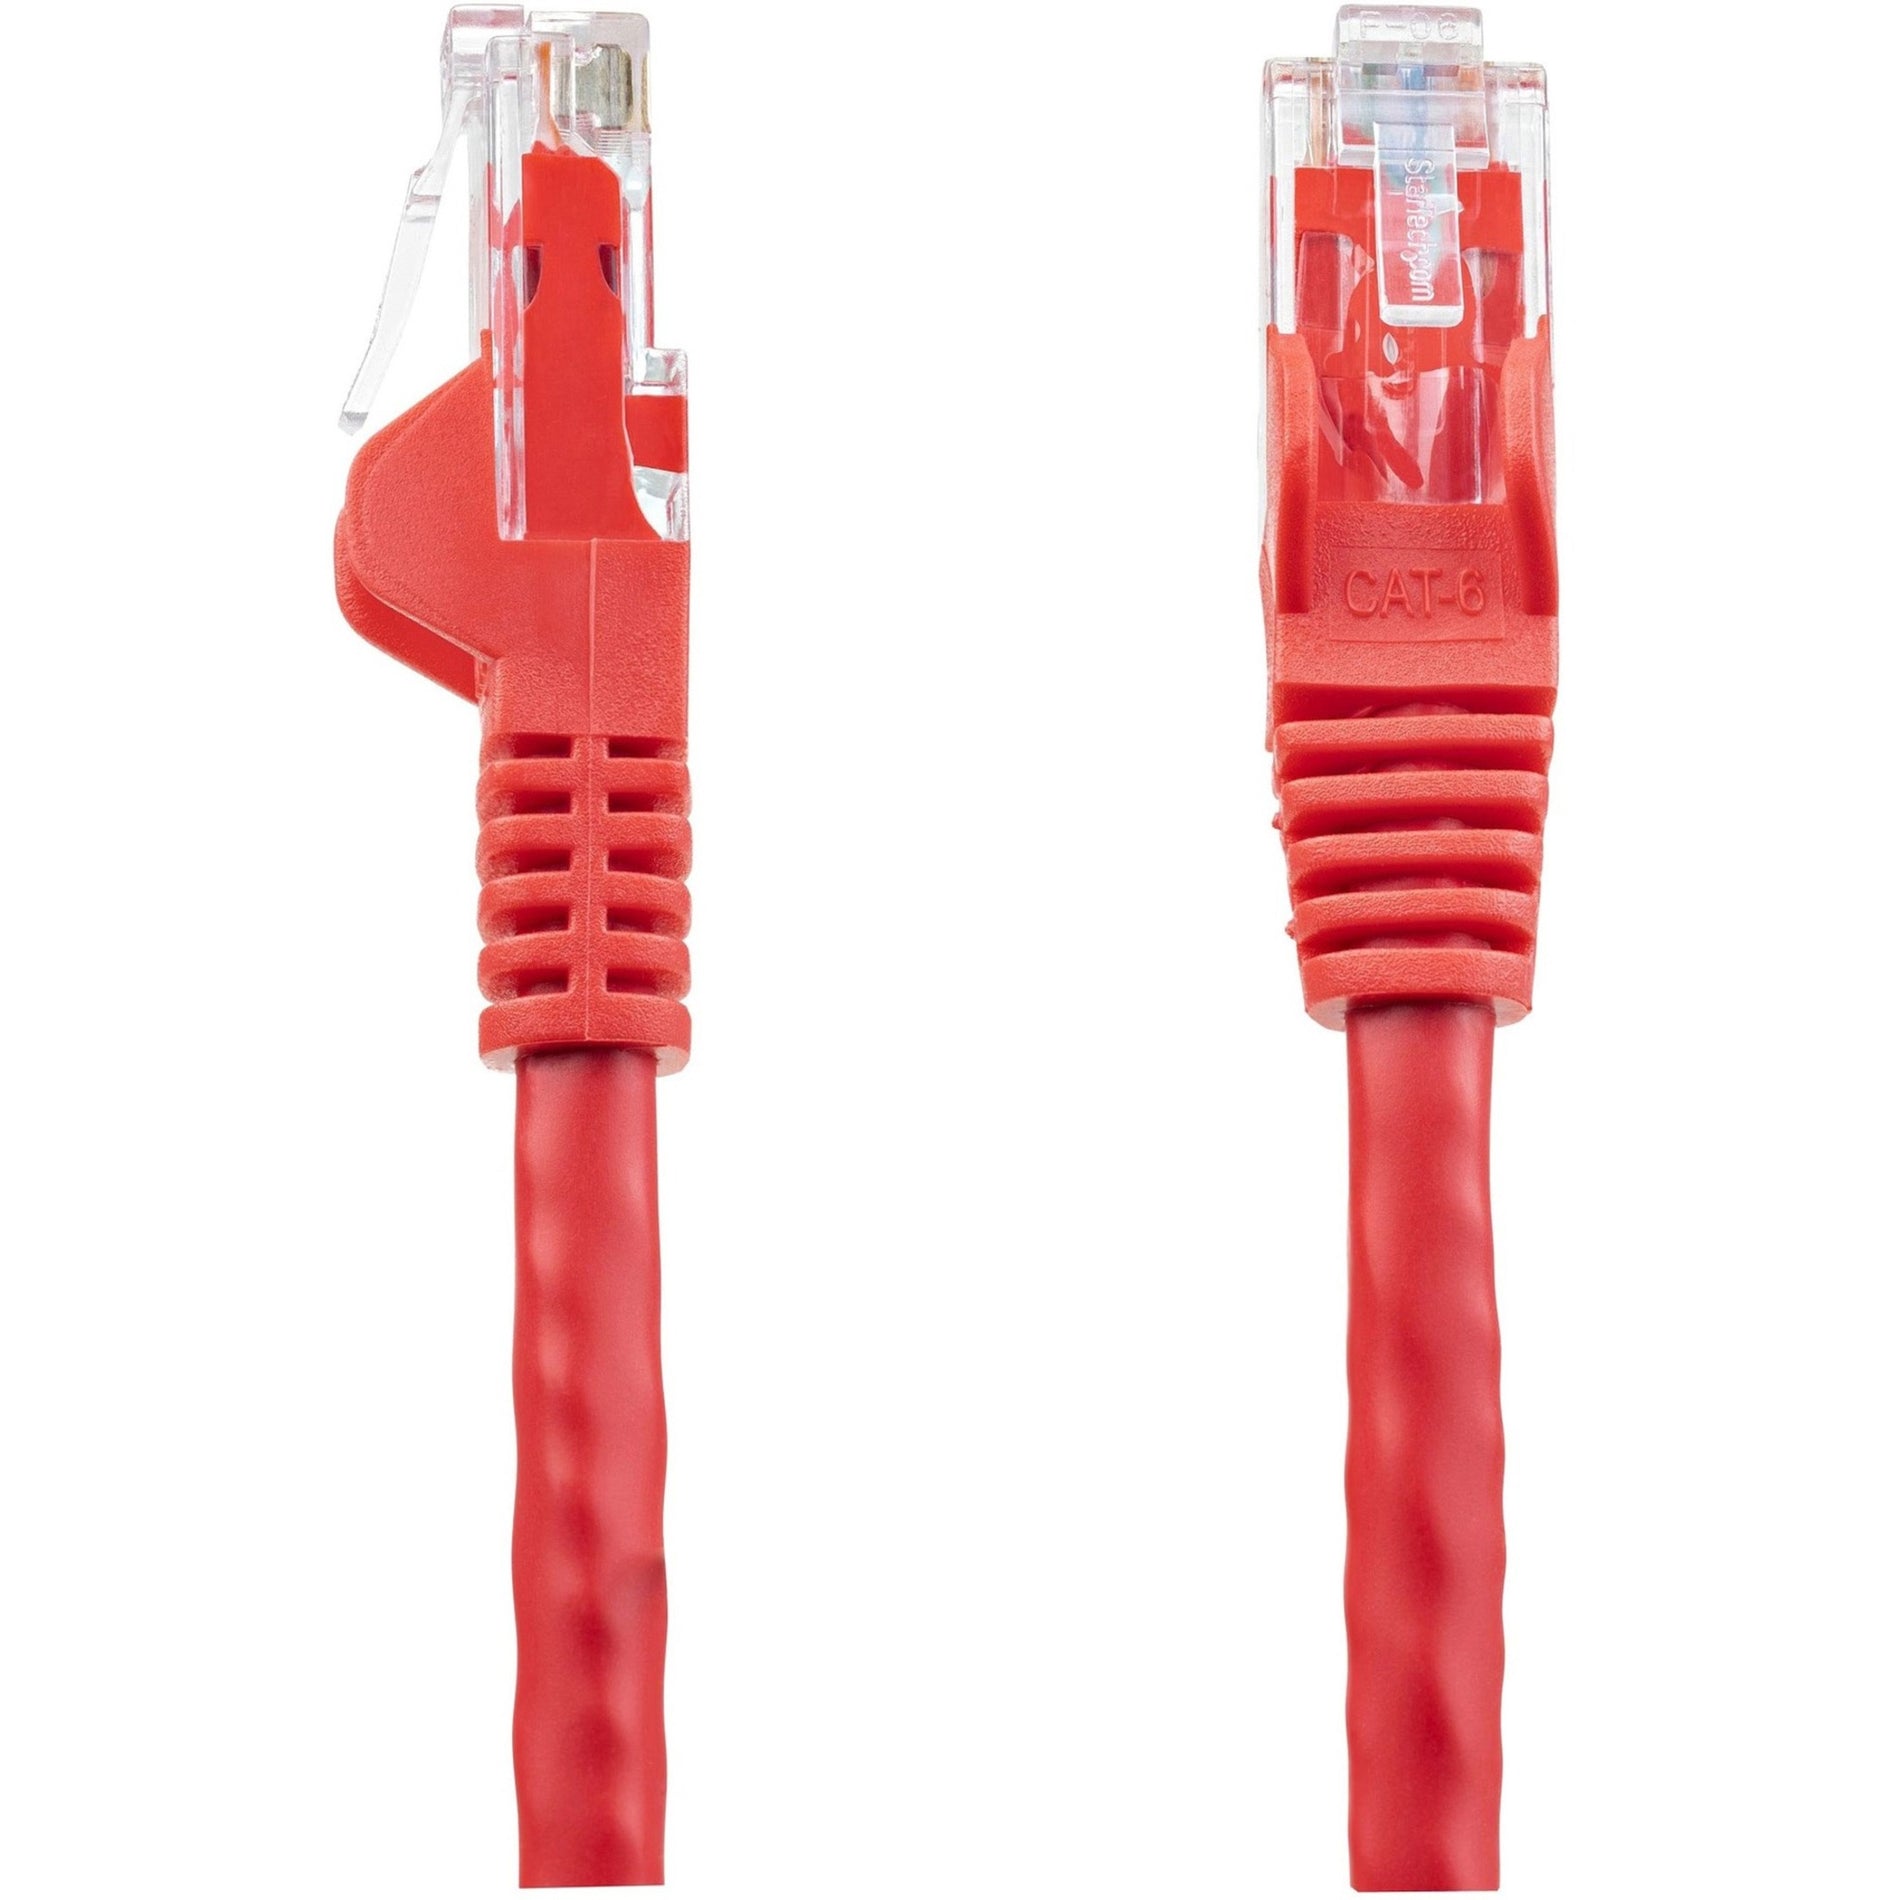 StarTech.com N6PATCH6INRD Cat.6 Patch Cable, 6in Red, Snagless RJ45 Connectors